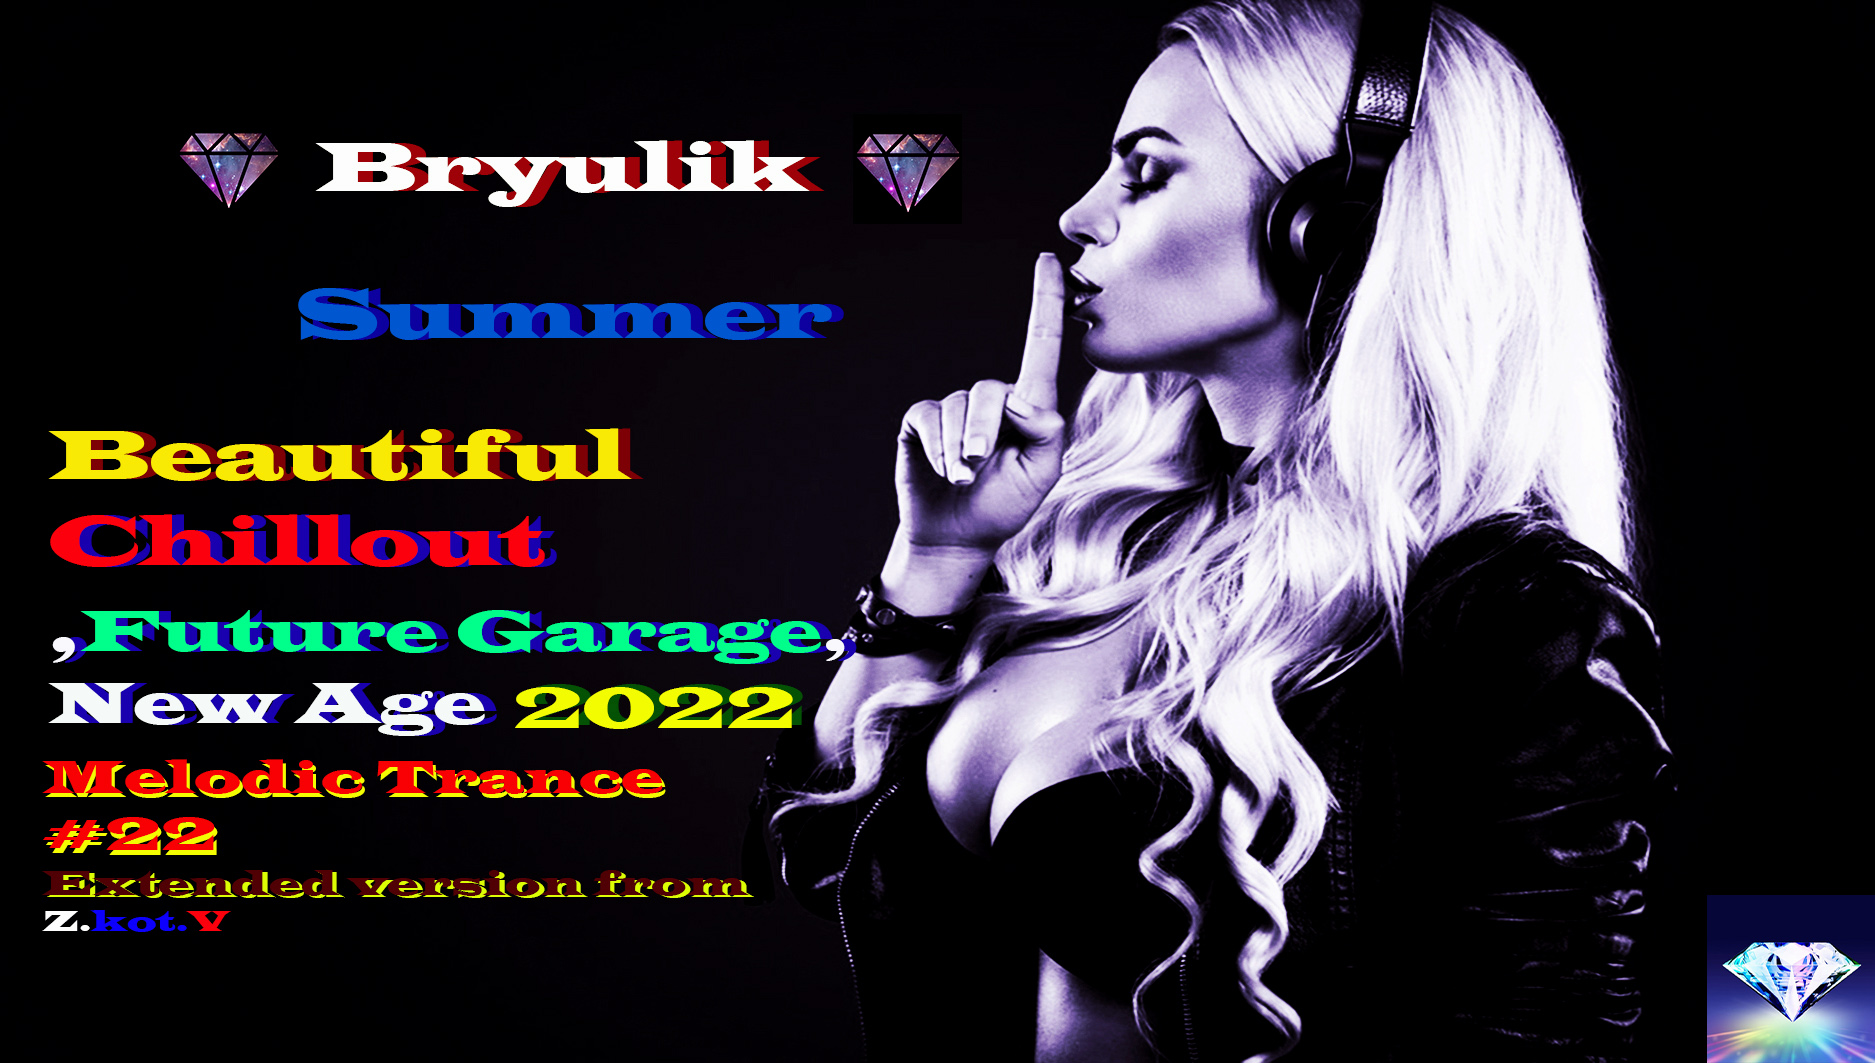 Bryulik - Summer (2022, Chillout,Future Garage,New Age) Релакс, Чил, Чилаут,#22,.mp4